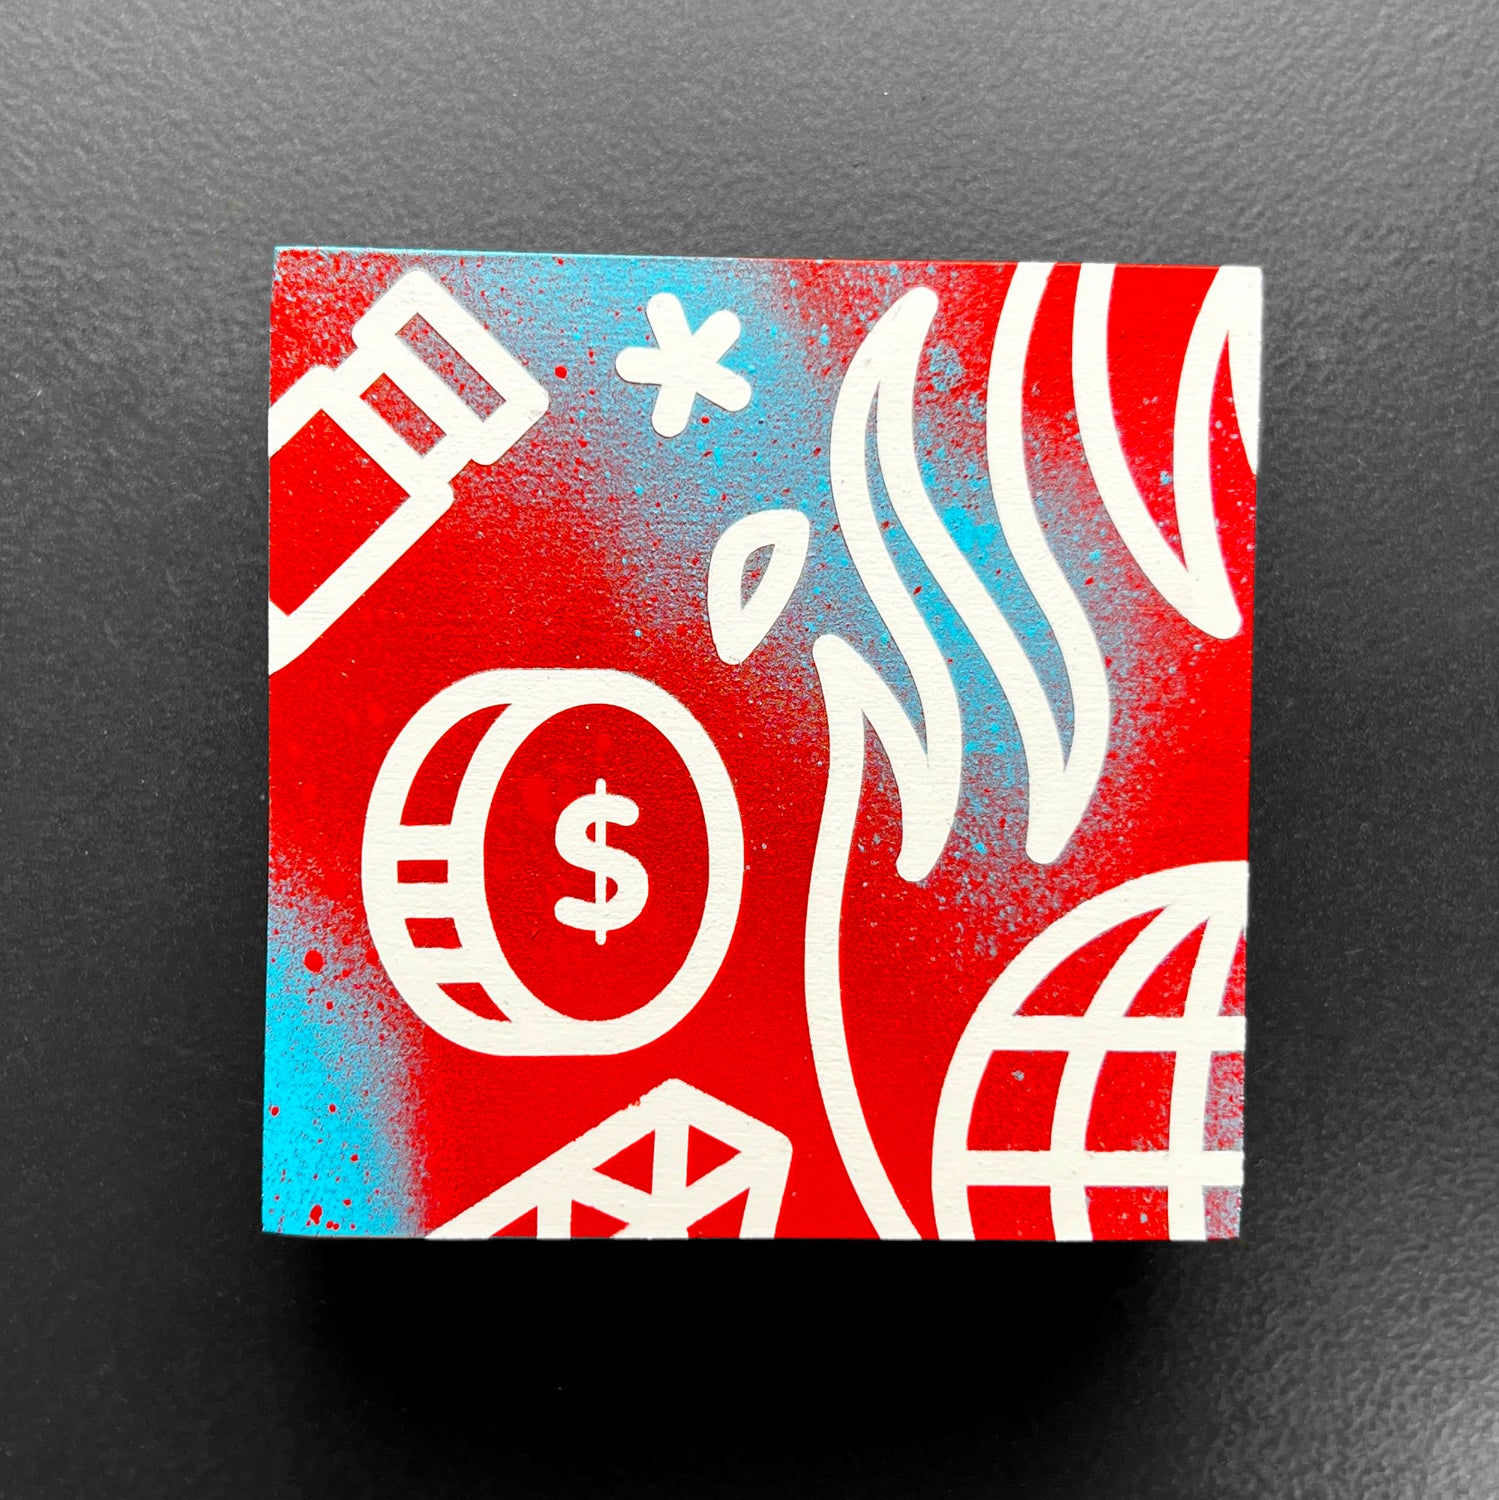 An original painting by the artist, Red Halftone. A 4x4” painting on a wood panel of various illustrated items drawn in a white single-weight line. The items represent current day topics discussed by the media. The items include: a globe on fire, a diamond, a coin, and bullet. The background is a red and cyan spray painted texture.